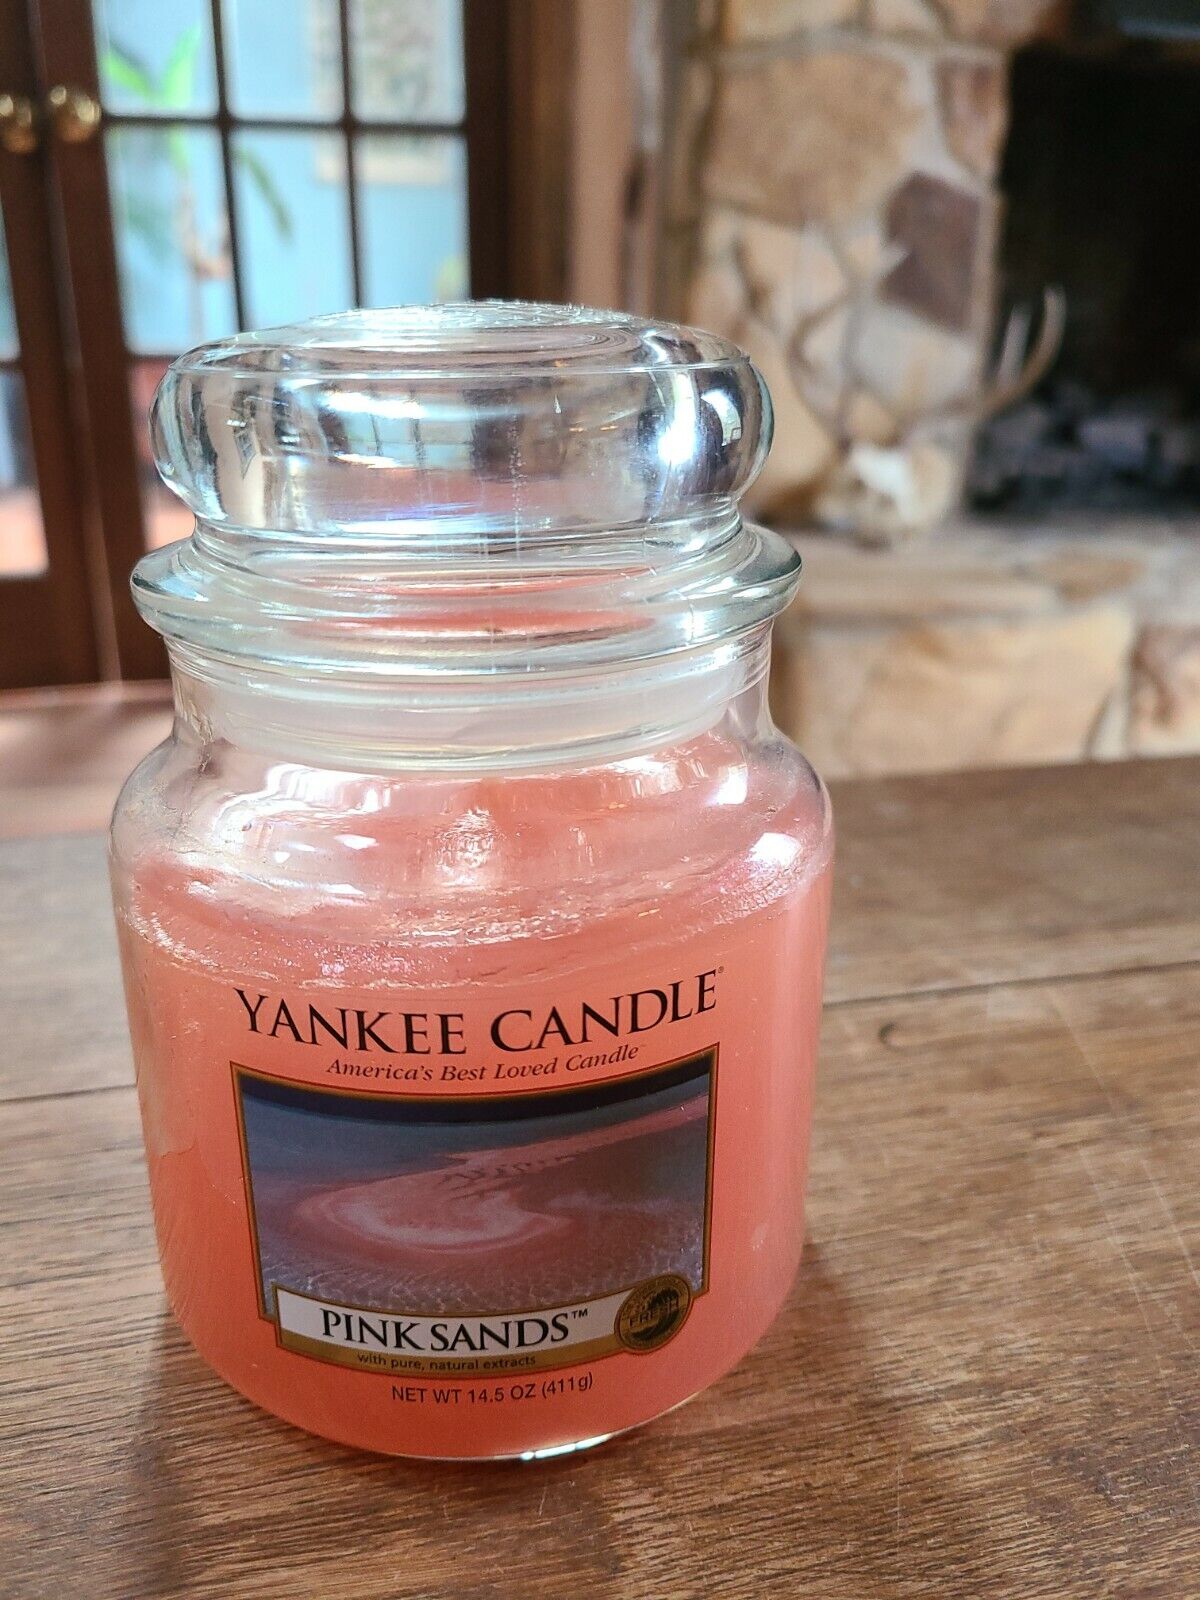 NEW Yankee Candle PINK SANDS 14.5 oz Jar Candle UNLIT